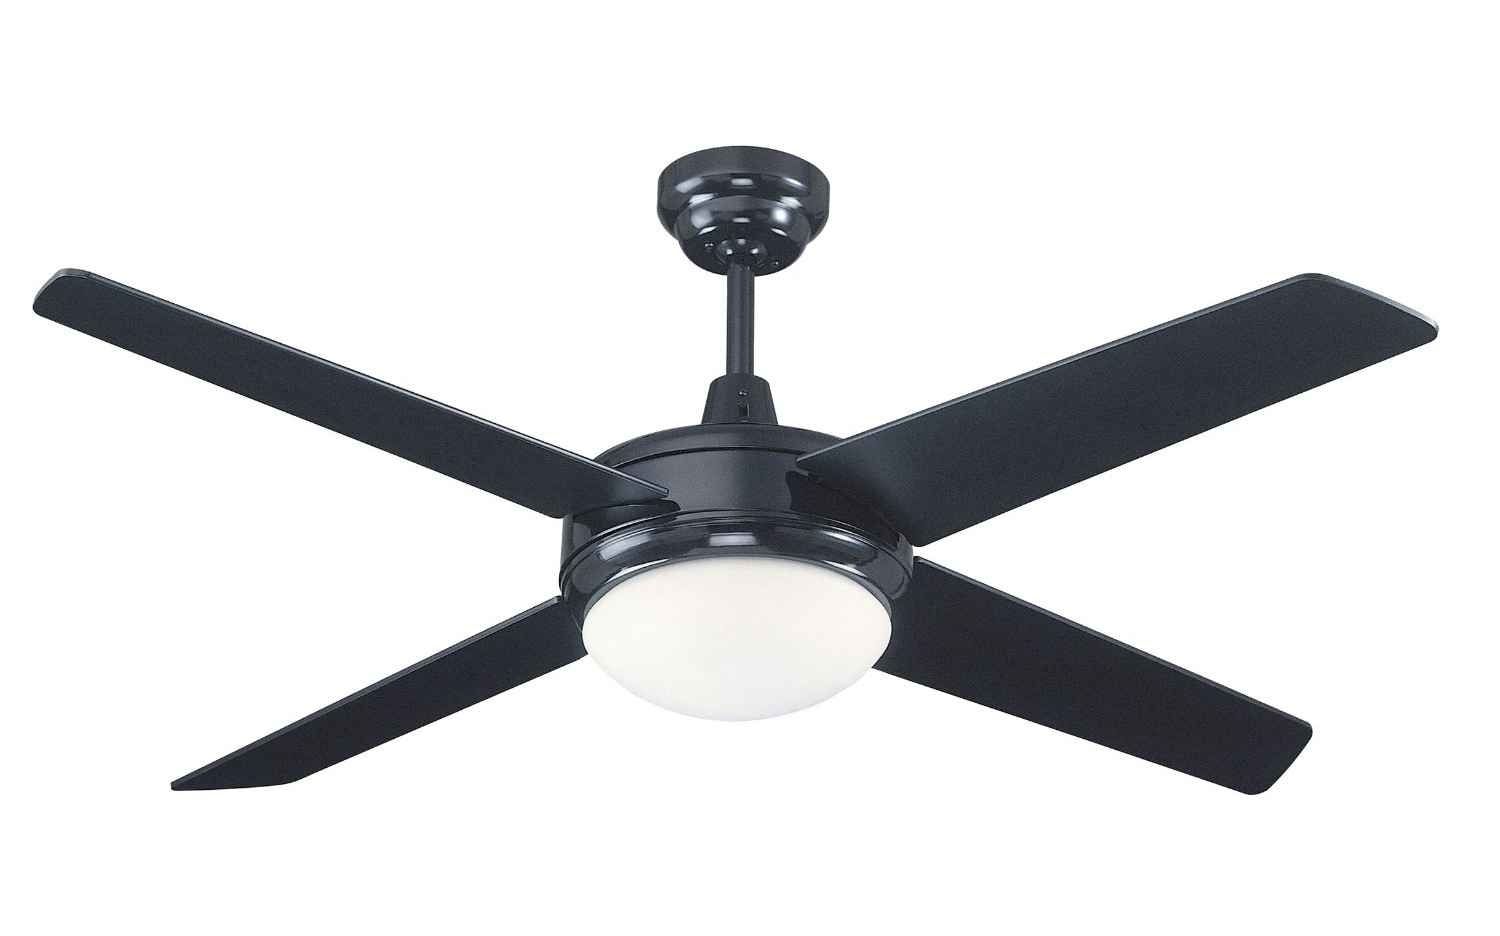 20 Best Collection Of Outdoor Ceiling Fans With Lights And Remote Regarding Most Recently Released Outdoor Ceiling Fans With Light And Remote (View 13 of 20)